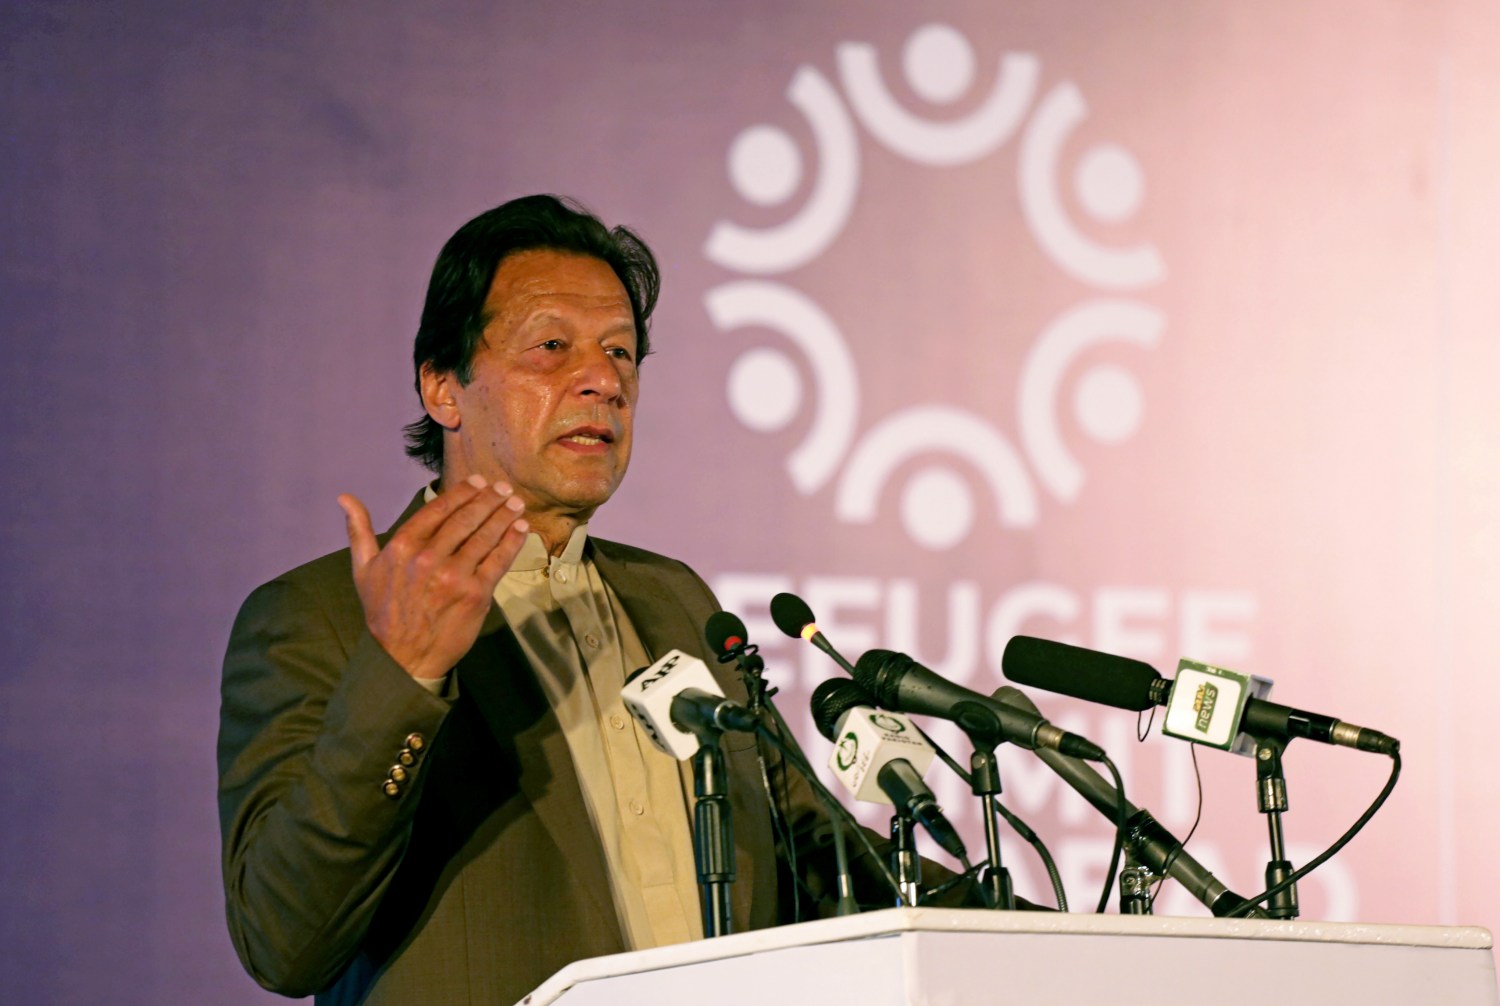 Pakistan's Prime Minister Imran Khan speaks during an international conference on the future of Afghan refugees living in Pakistan, organized by Pakistan and the UN Refugee Agency in Islamabad, Pakistan February 17, 2020. REUTERS/Saiyna Bashir